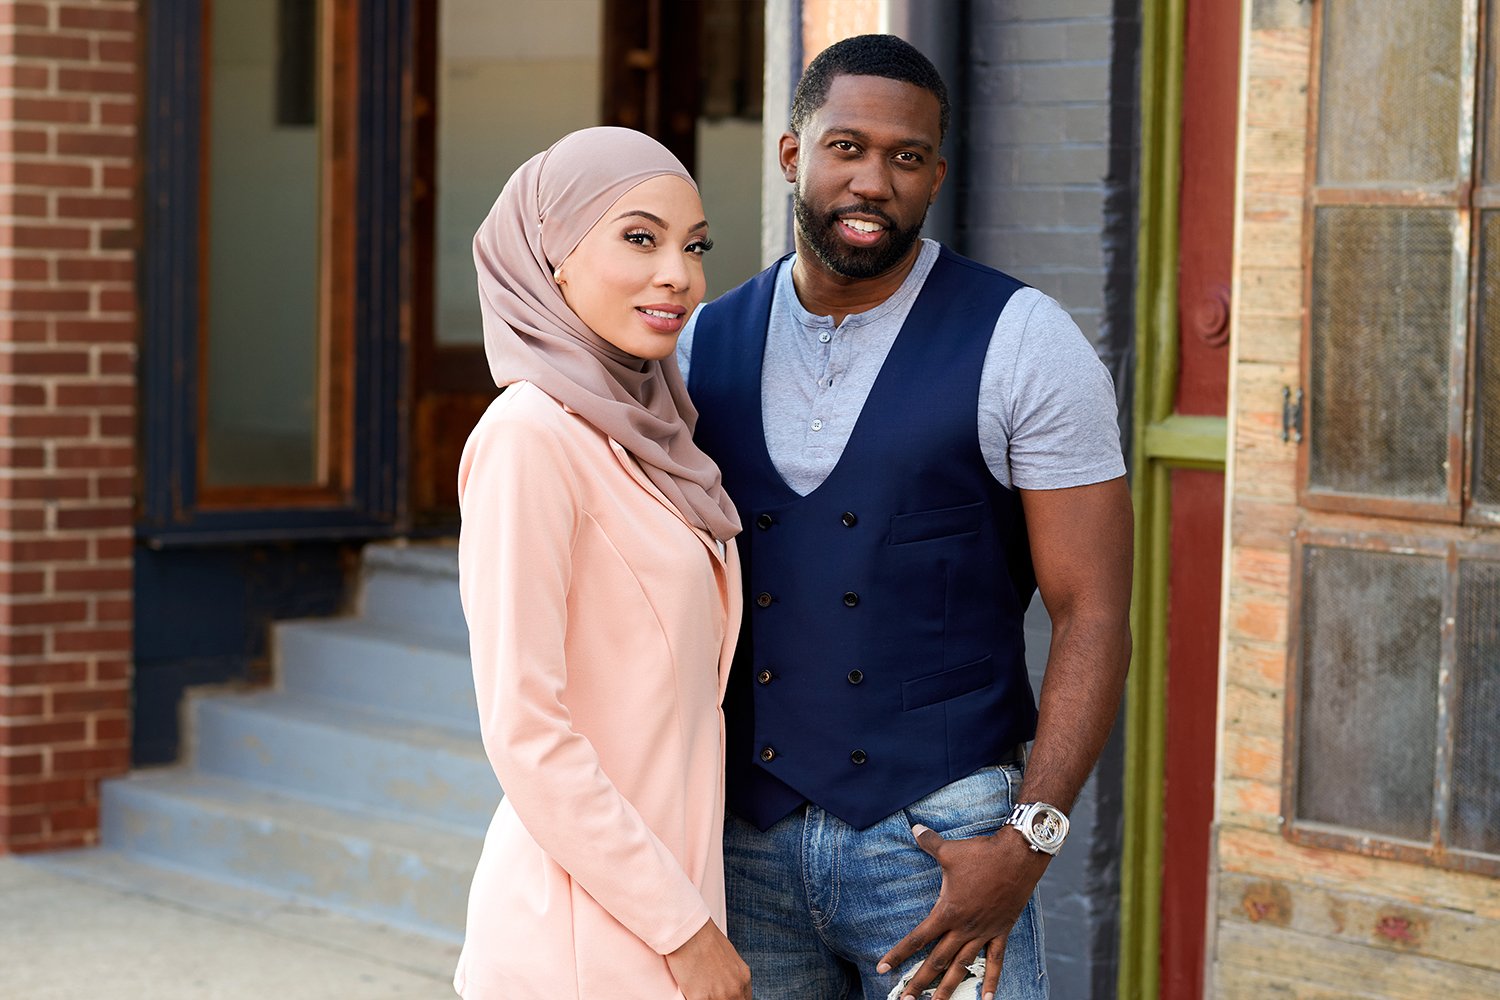 Shaeeda and Bilal, who claims to have OCD, on 90 Day Fiancé Season 9.